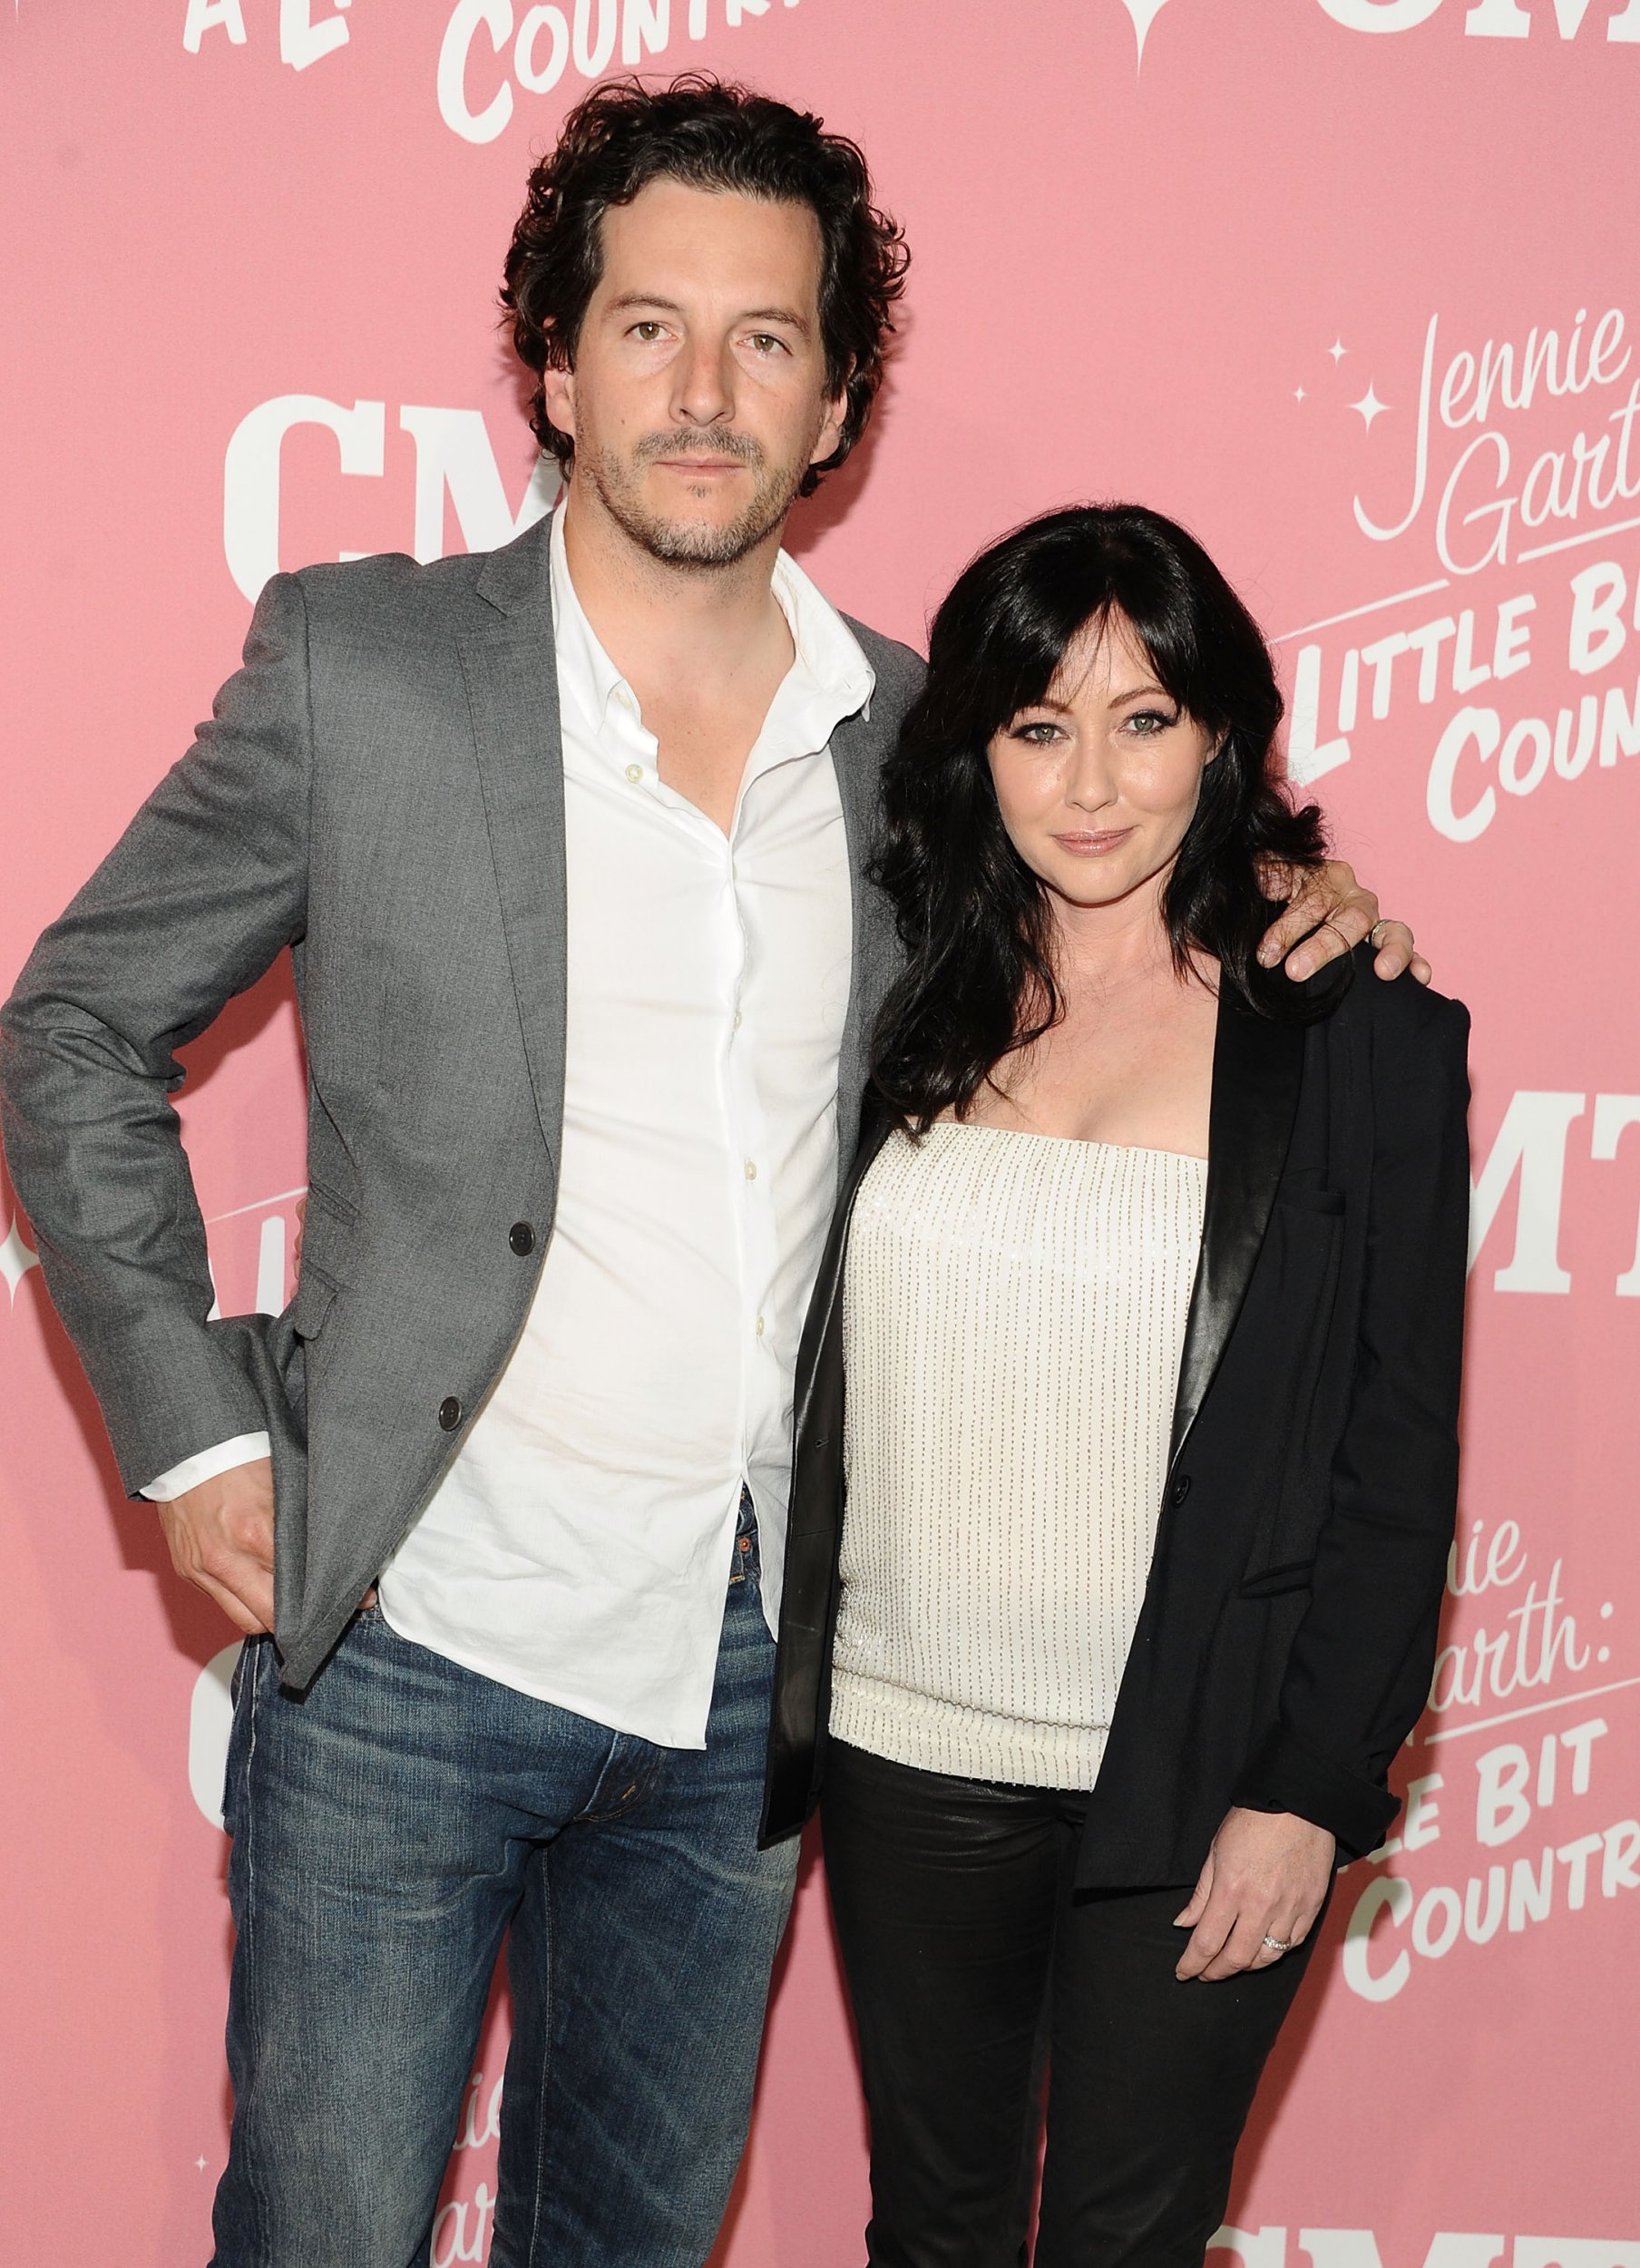 Shannen spoke out about how painful her divorce was while she was fighting for her life